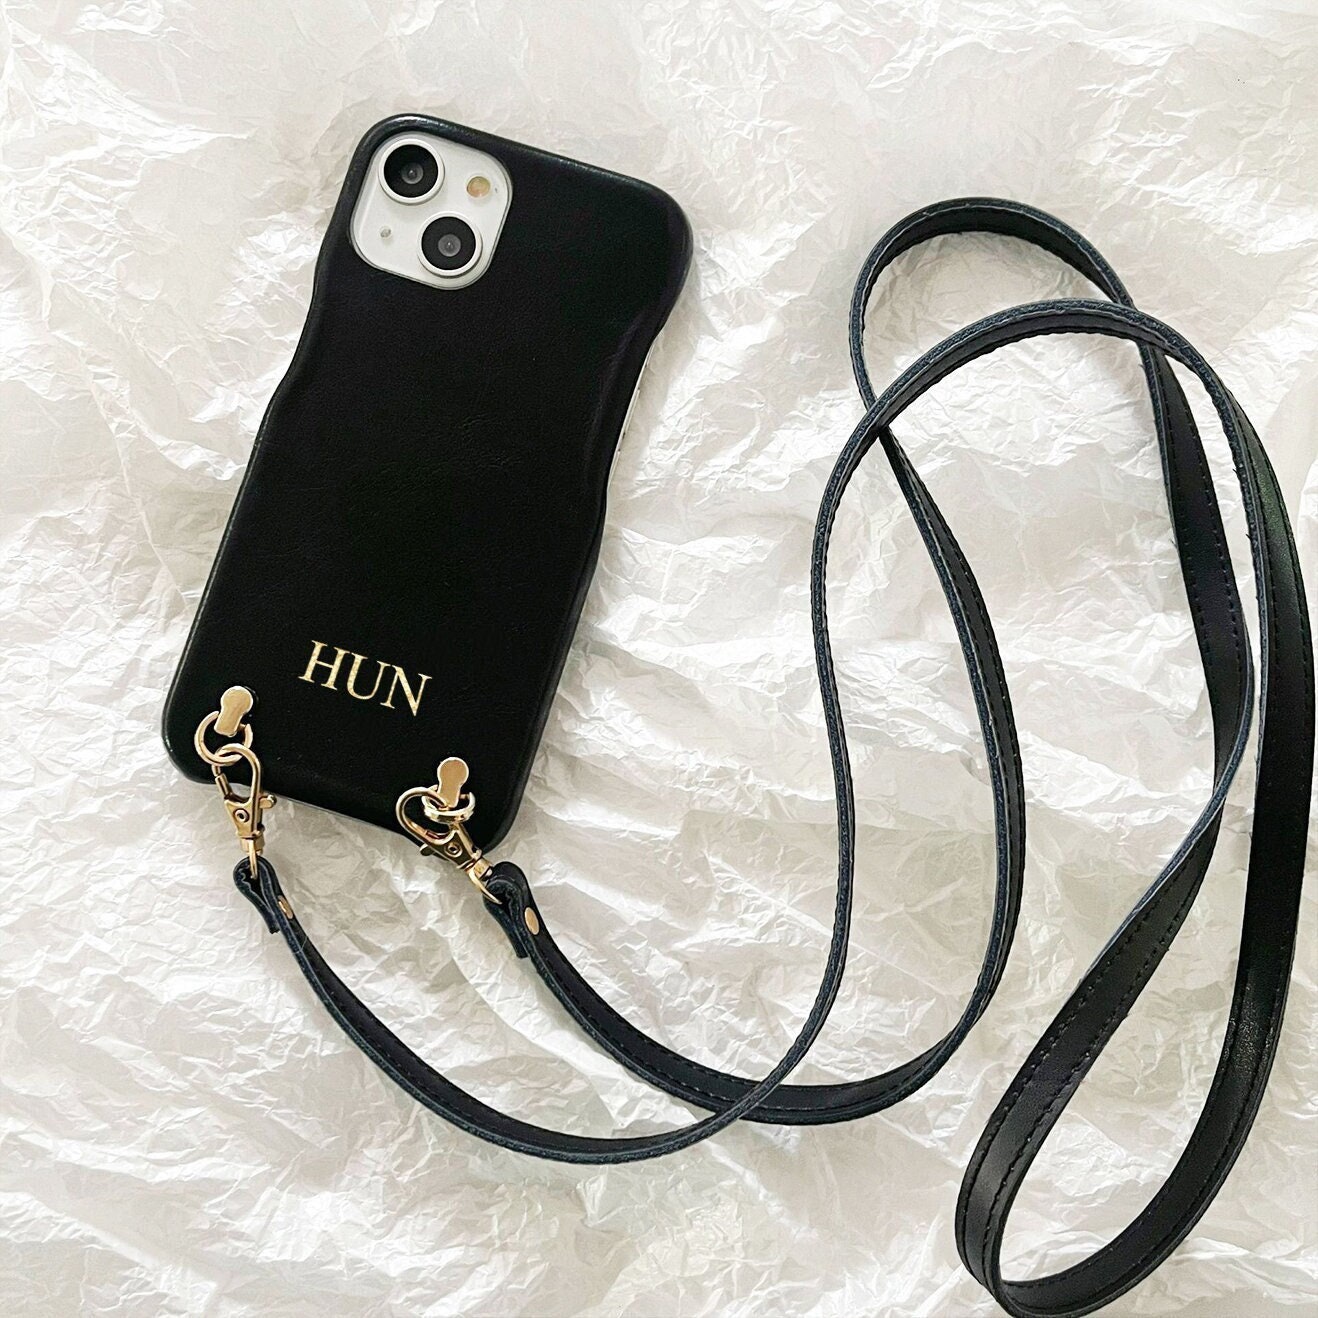 B - Silver Vintage Monogram on White Leather iPhone Case by Serge